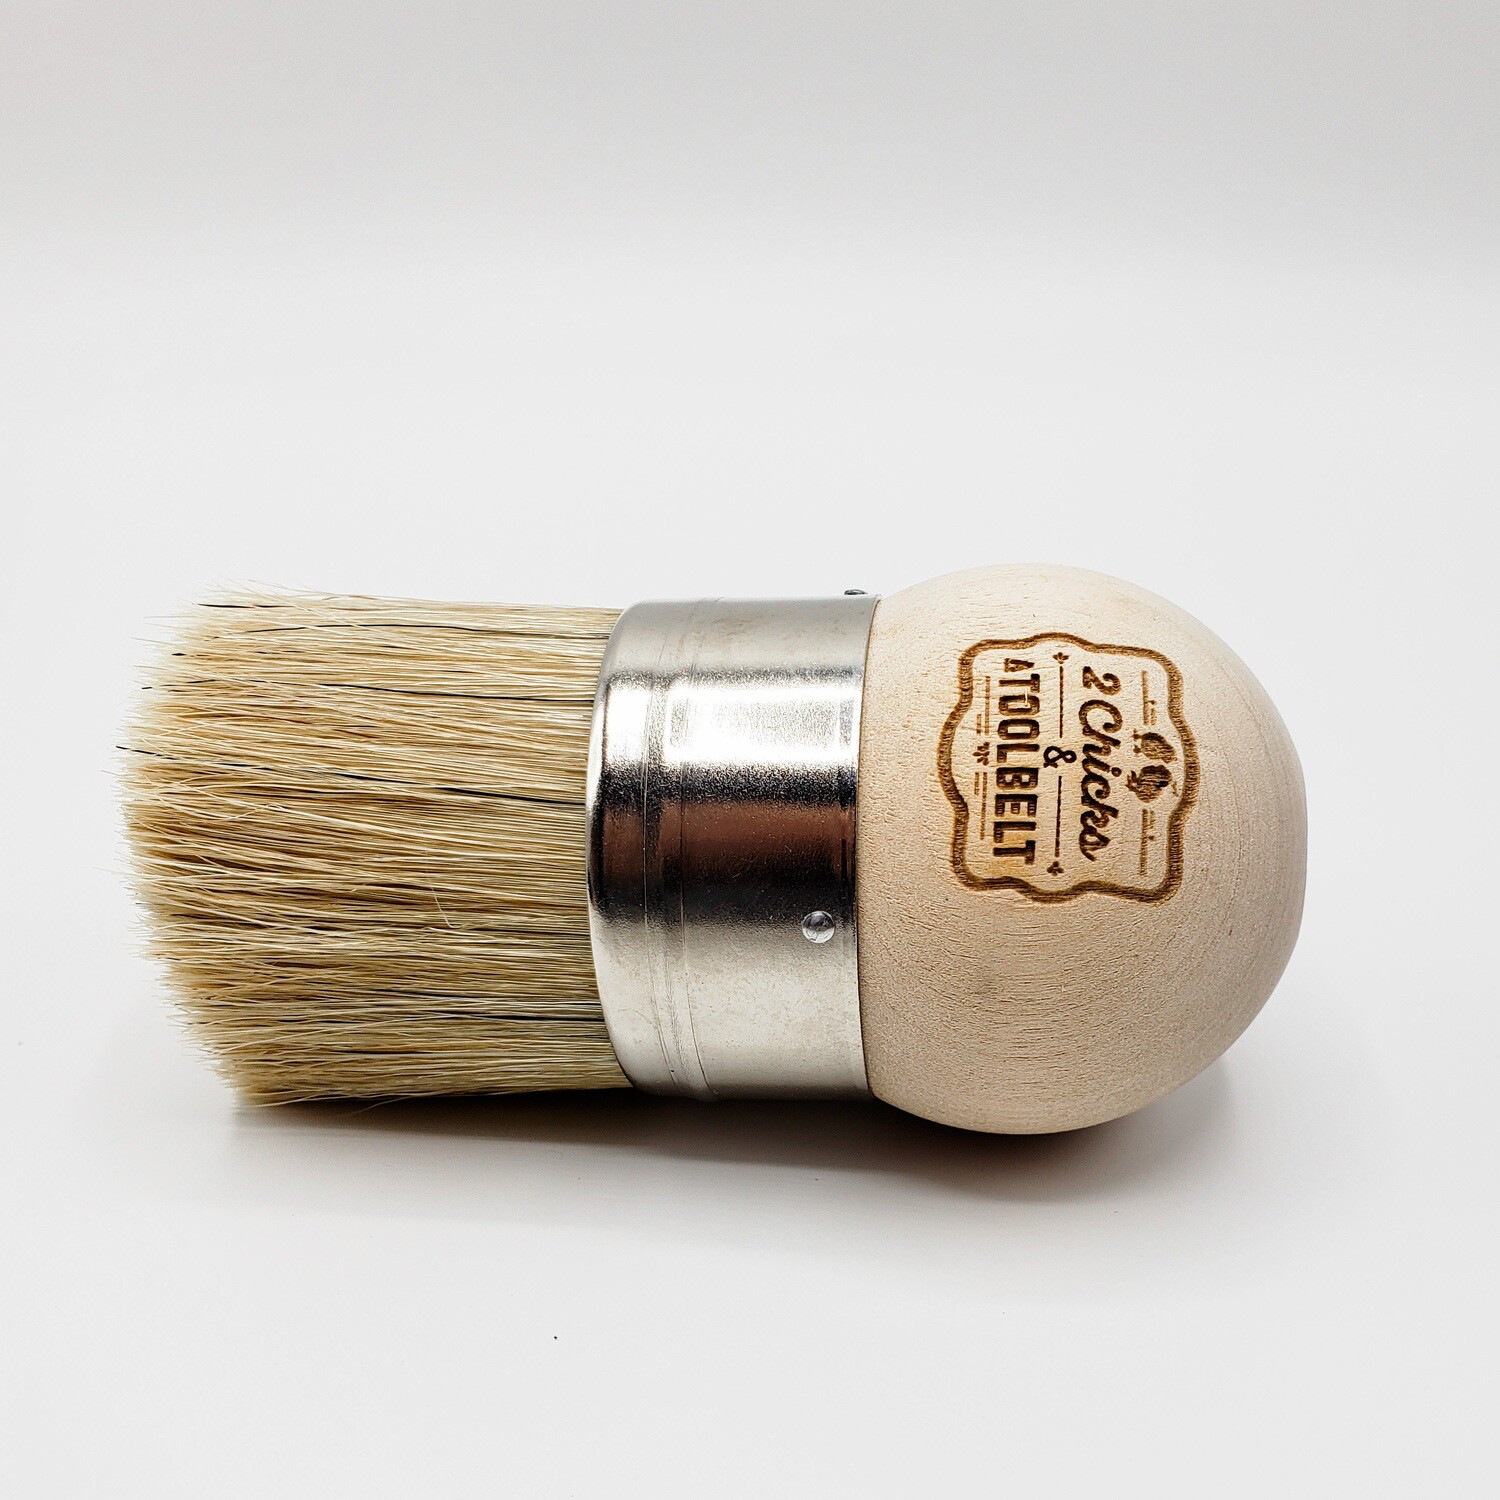 The Fat Wax Brush - Clearance SALE over 50% off